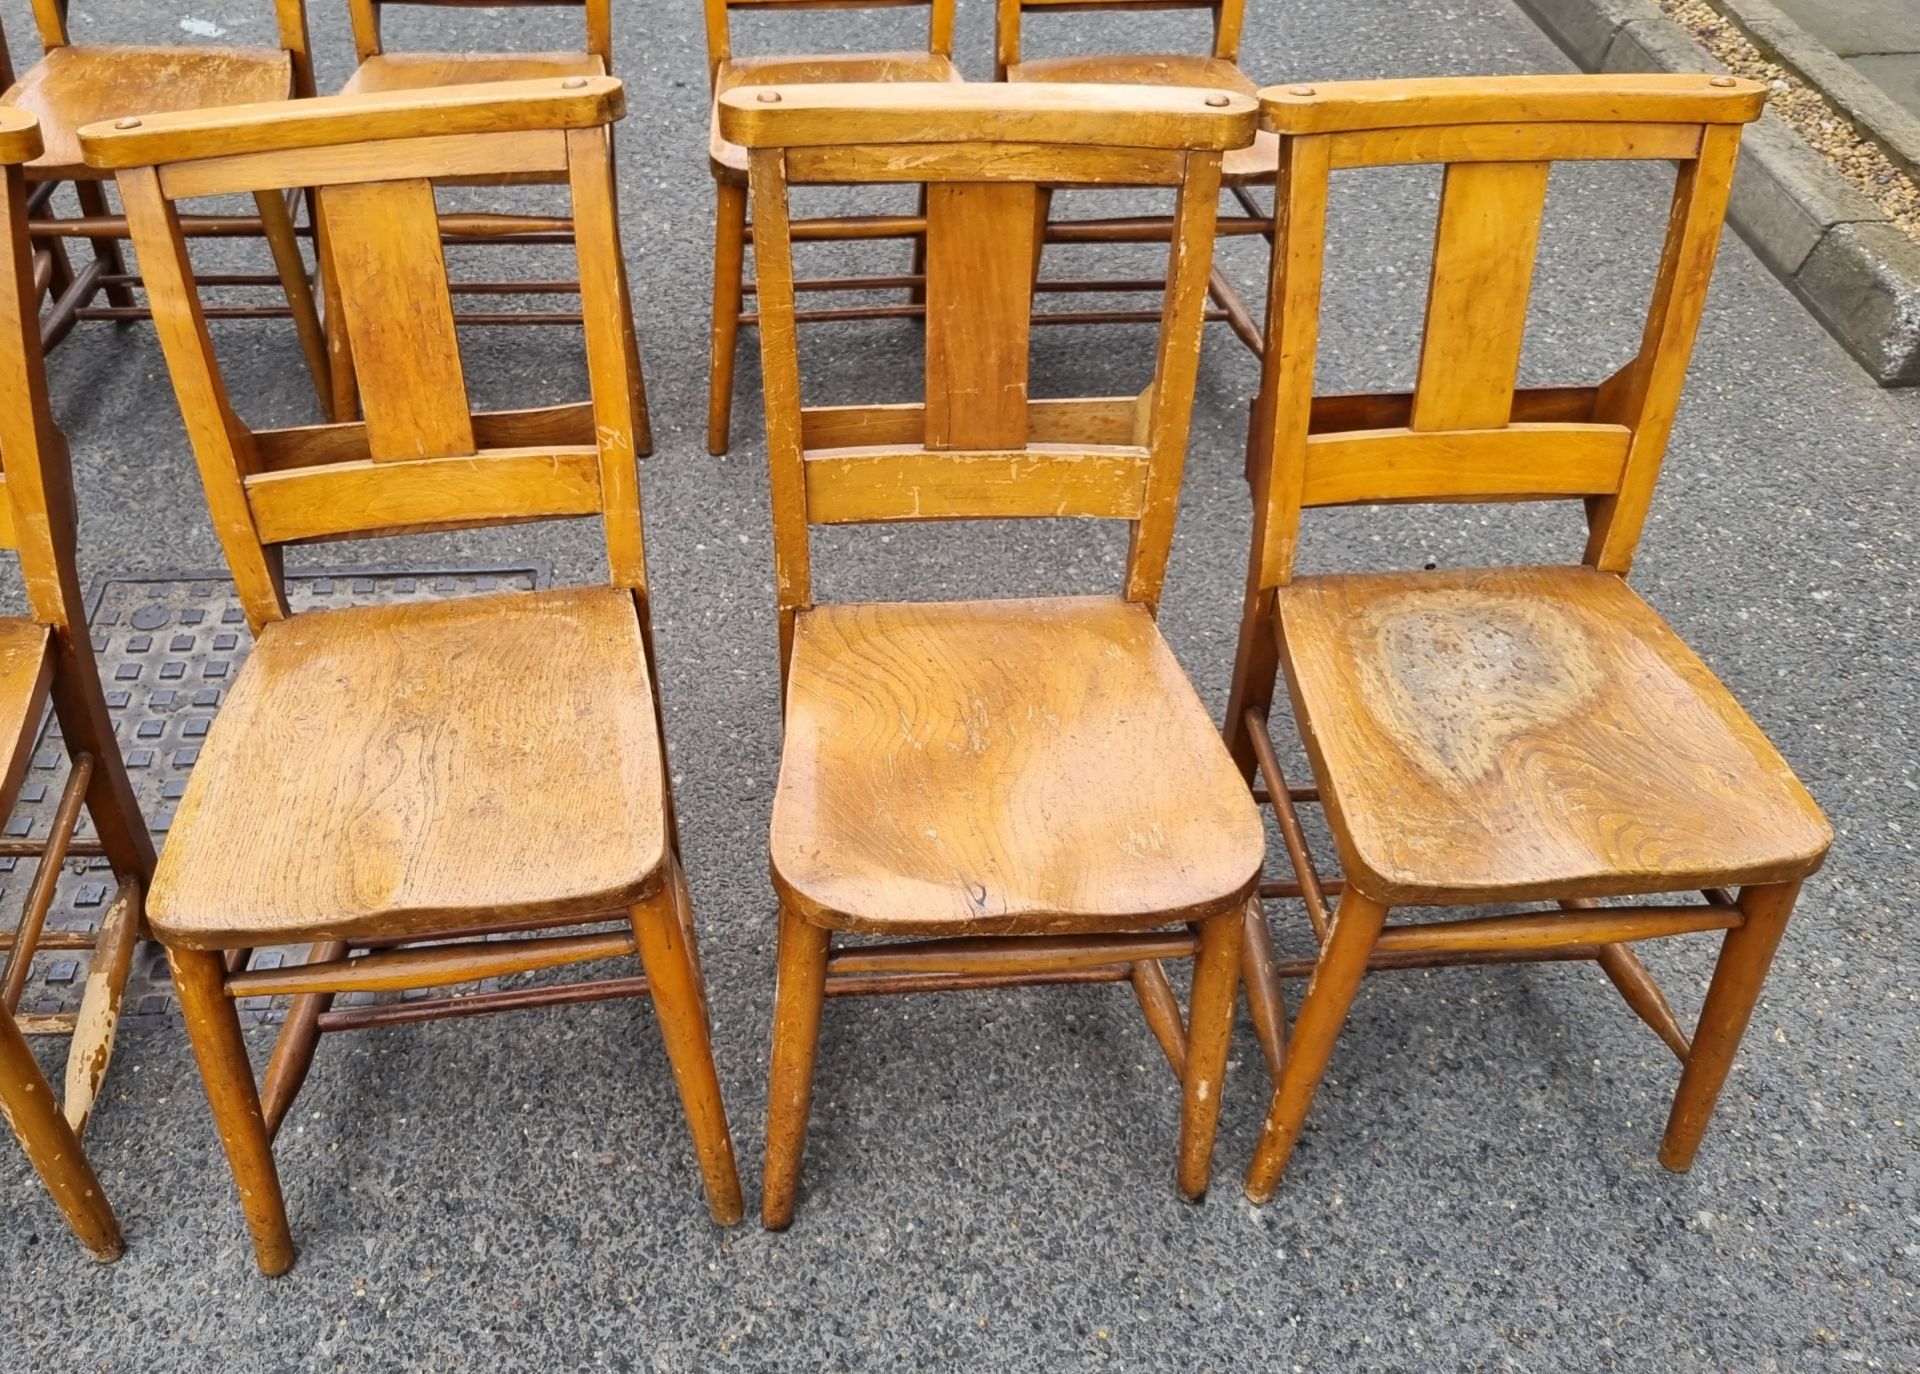 12x Wooden chairs with rear book holder - L 420 x W 420 x H 820mm - Image 8 of 10